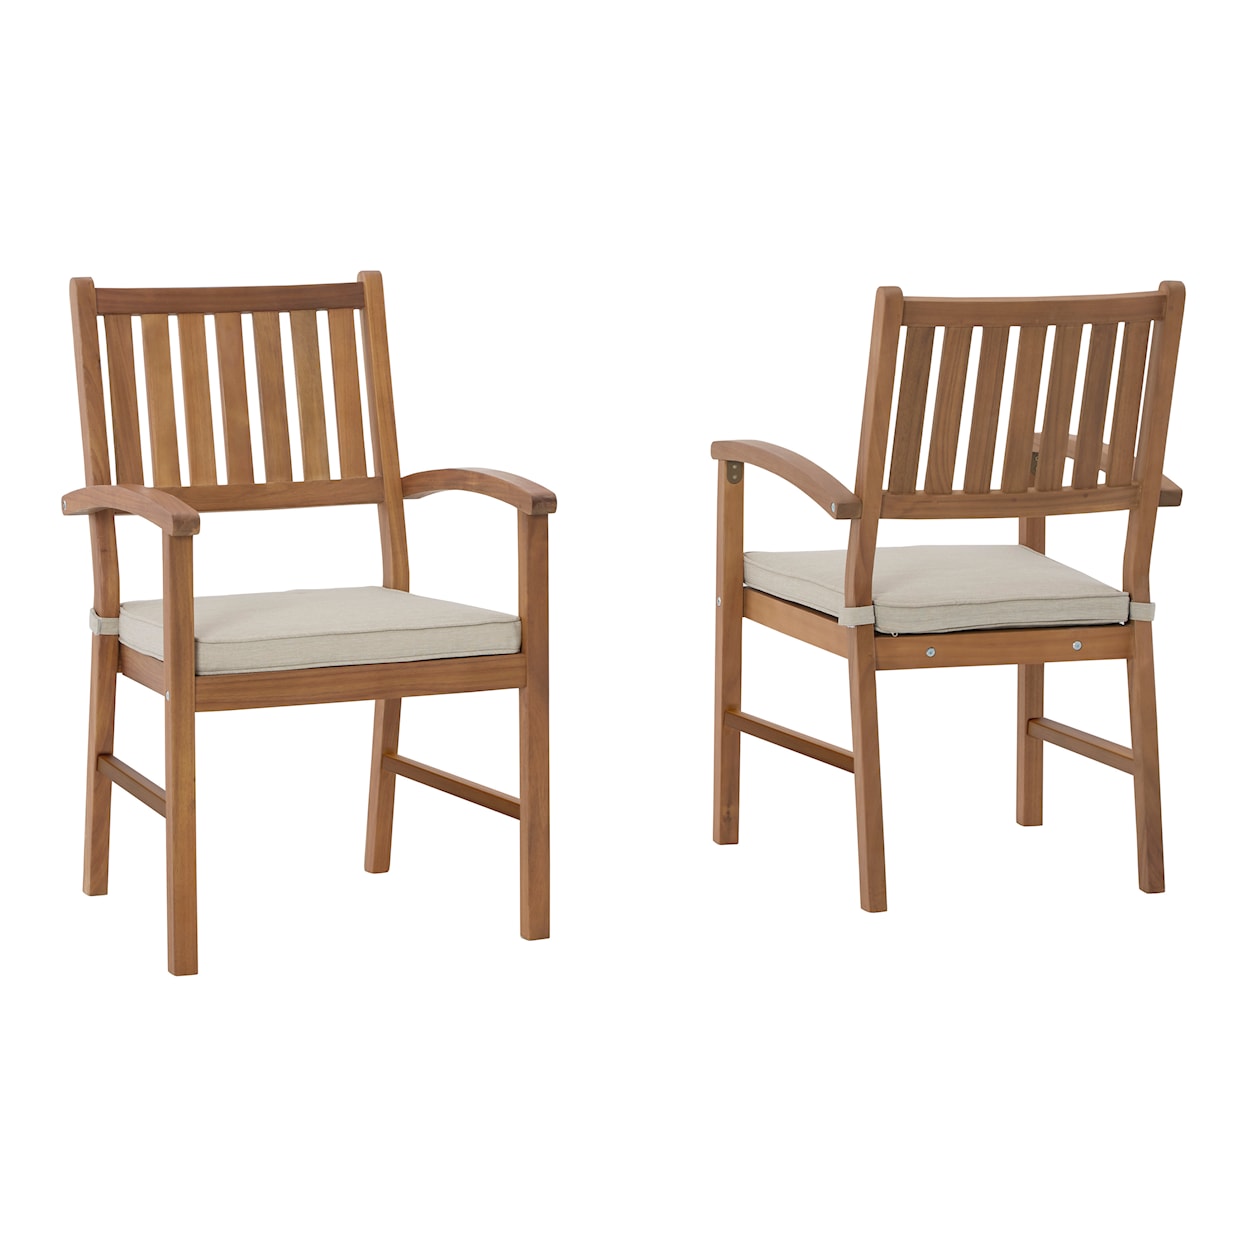 Ashley Signature Design Janiyah Outdoor Dining Set w/ 2 Chairs & Bench